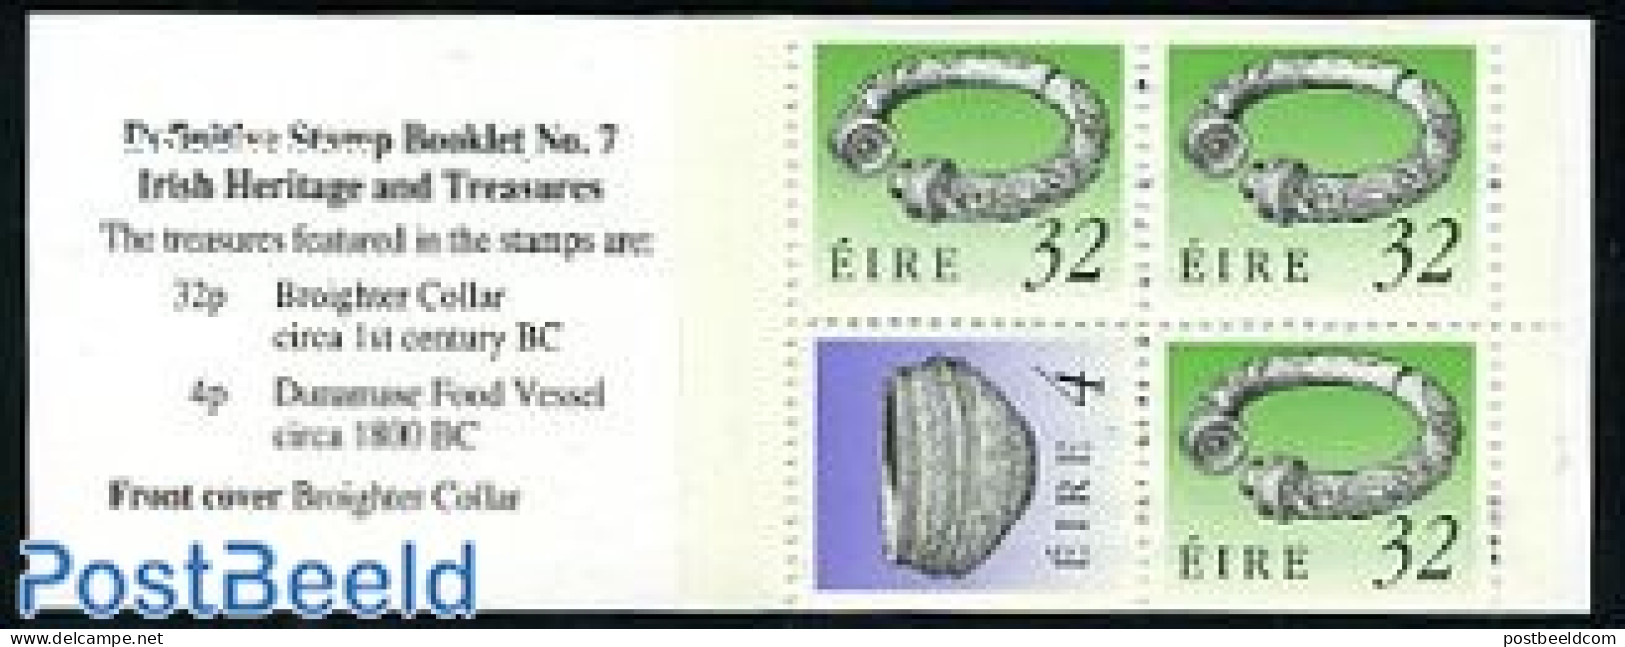 Ireland 1995 Irish Art Booklet, Mint NH, Stamp Booklets - Art - Art & Antique Objects - Unused Stamps